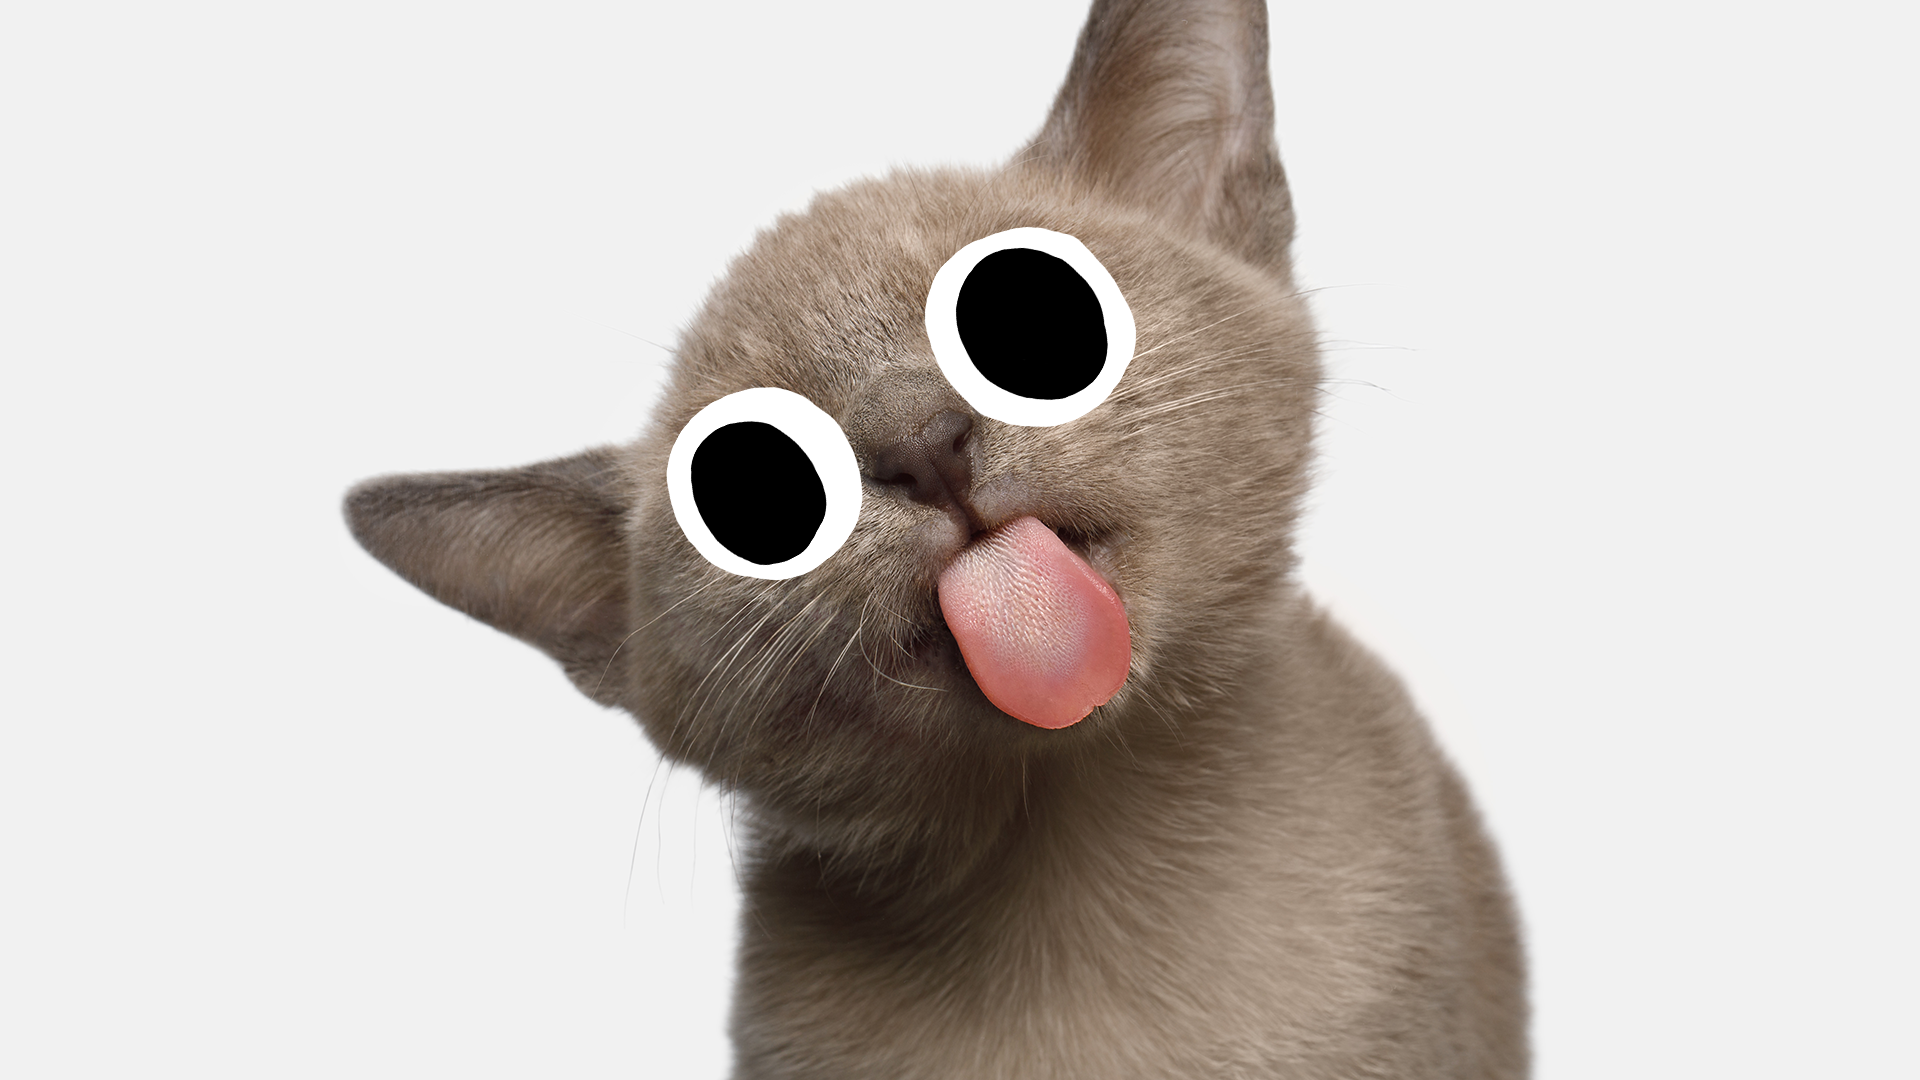 Cat sticking its tongue out on white background